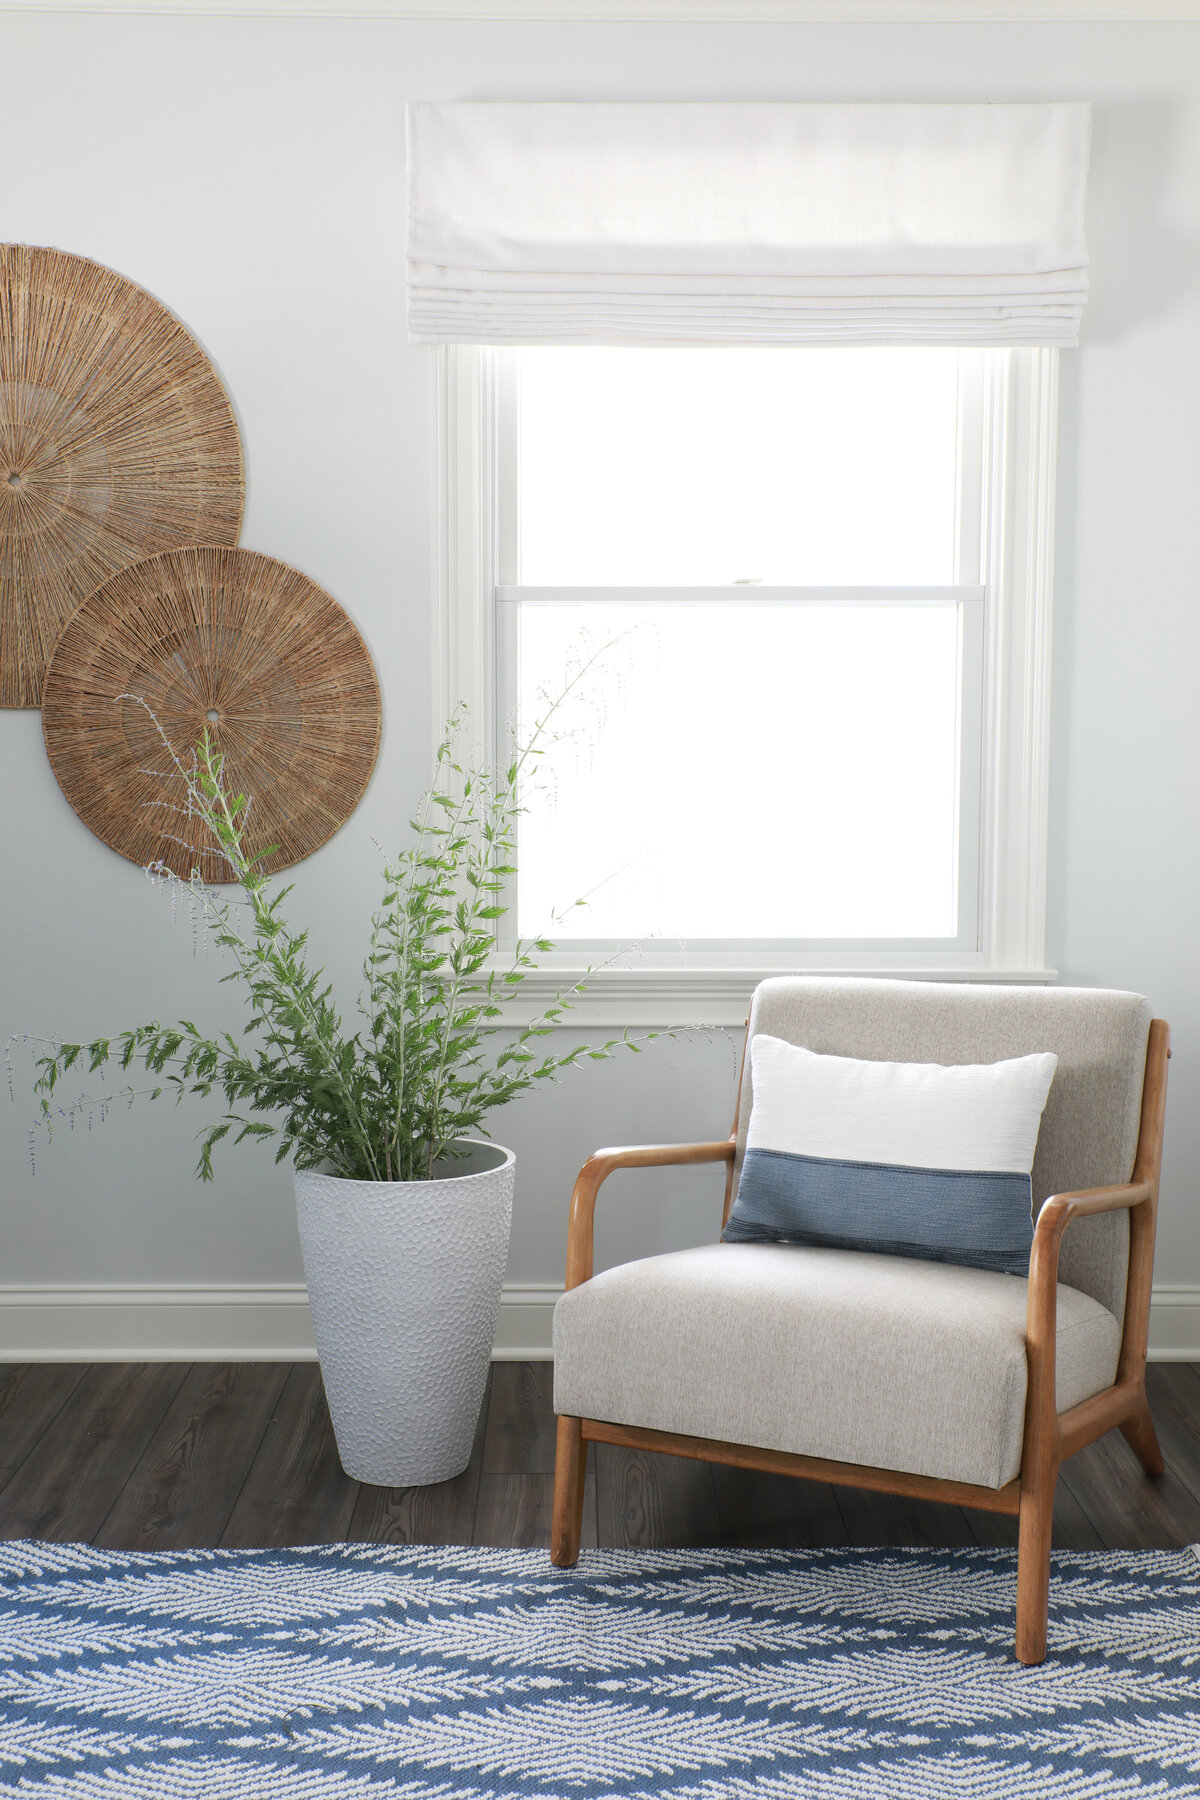 MODERN-CHAIR-WITH-WOVEN-WALL-ART-AND-ROMAN-SHADE